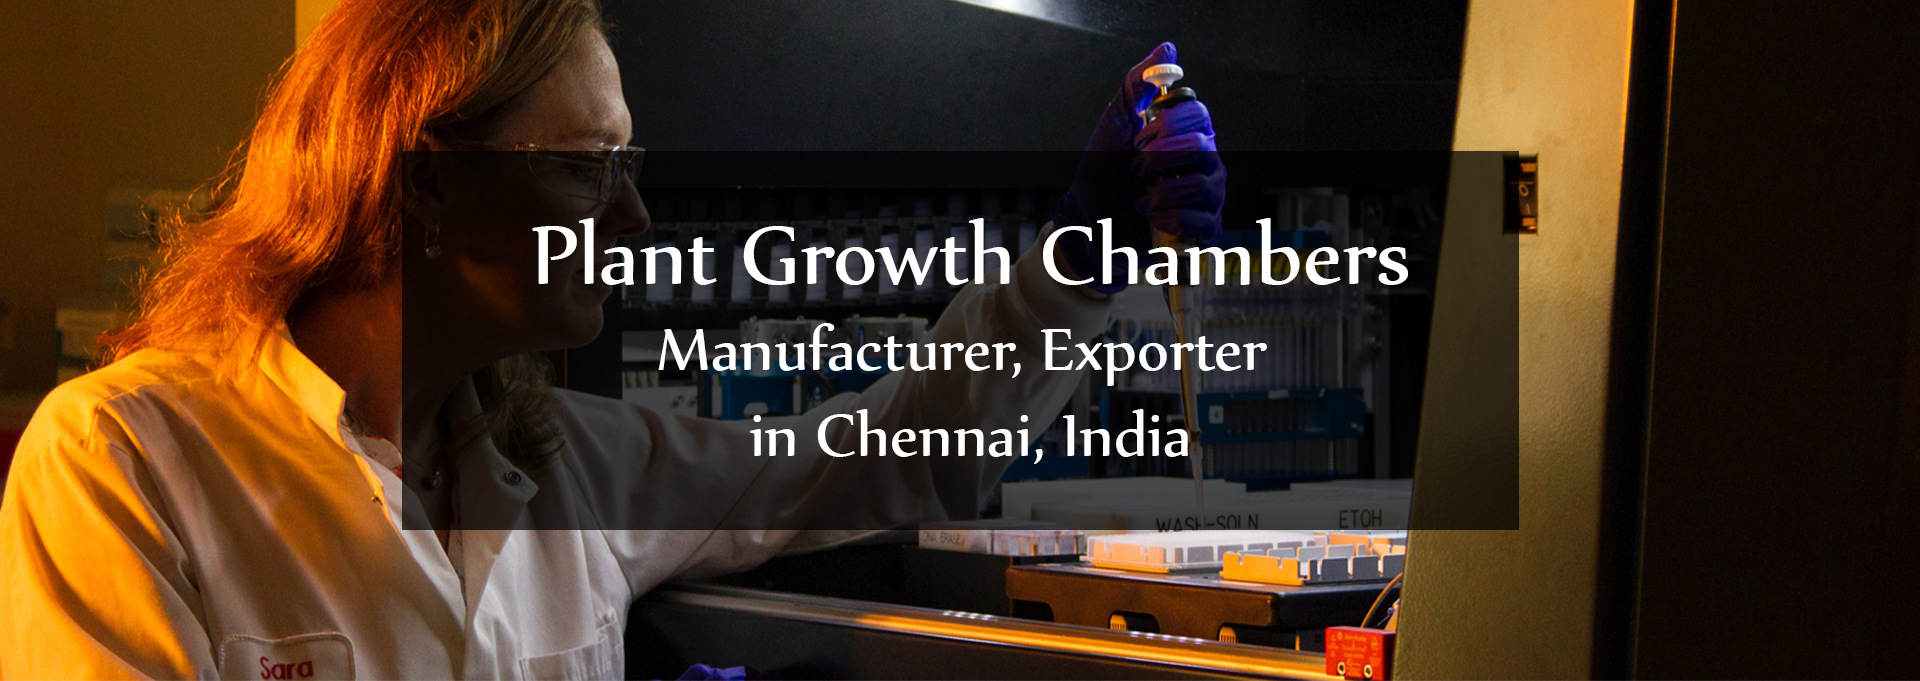 Plant Growth Chambers manufacturer, exporter in Chennai, India